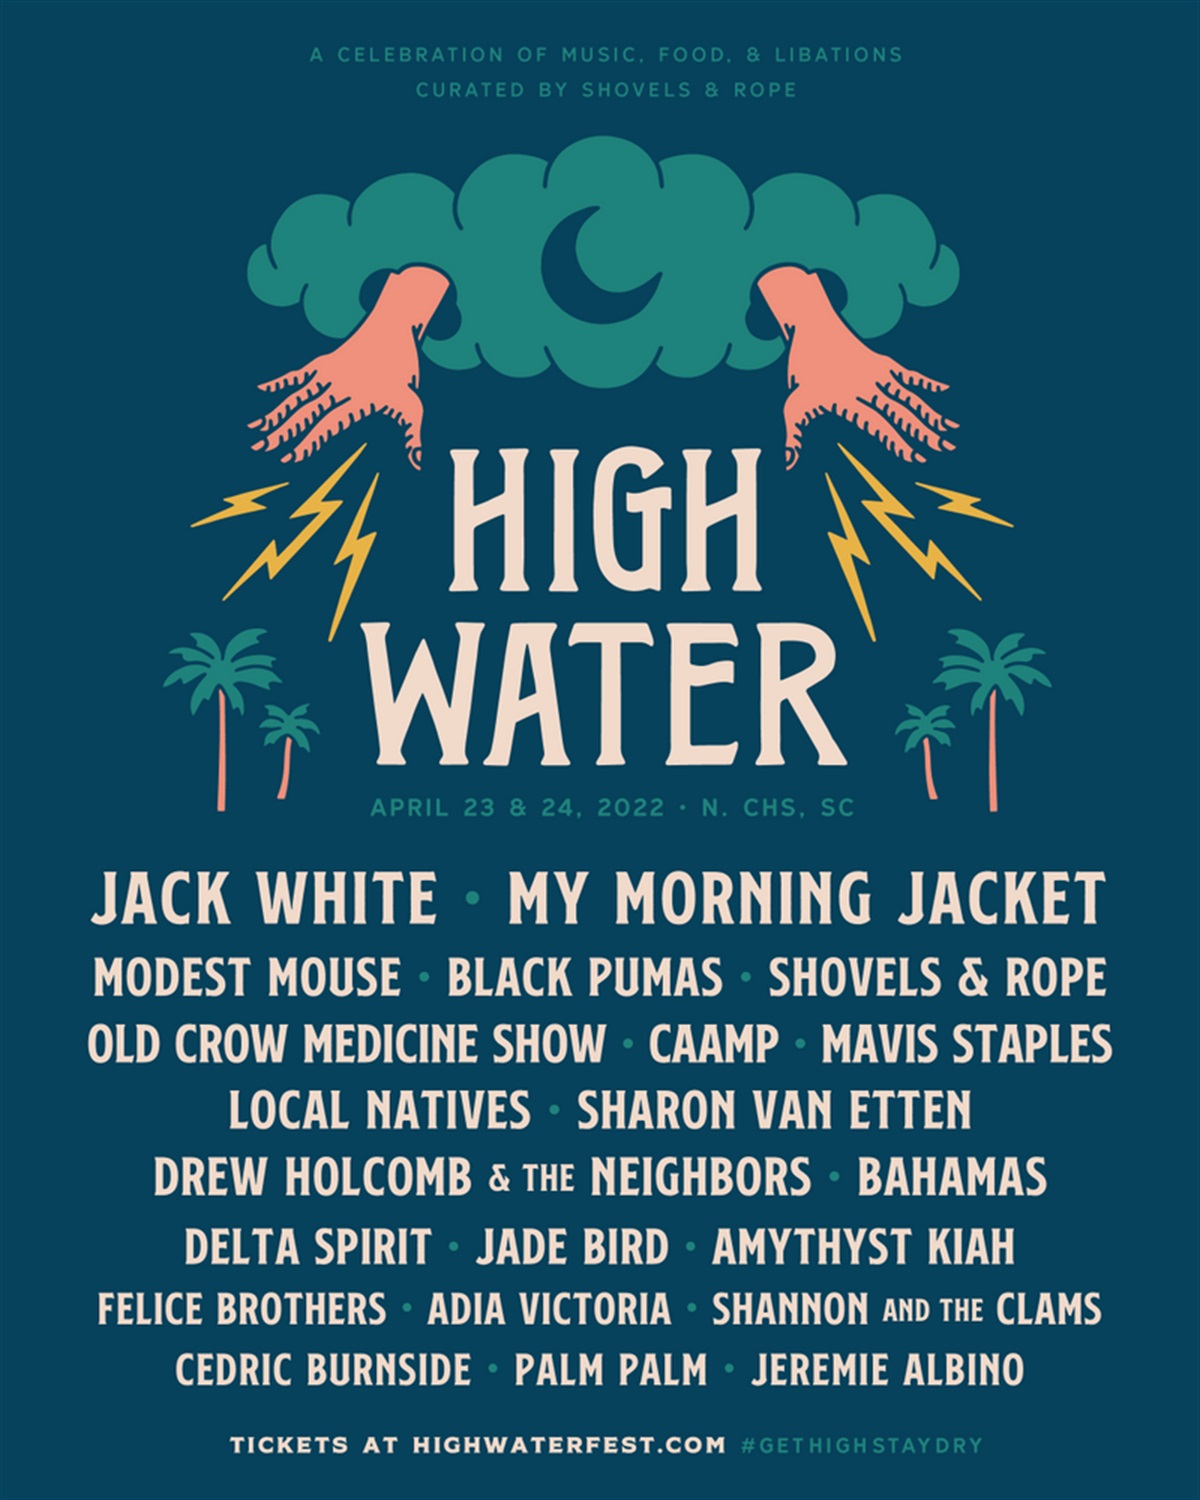 High Water Festival 2022 Is Here!